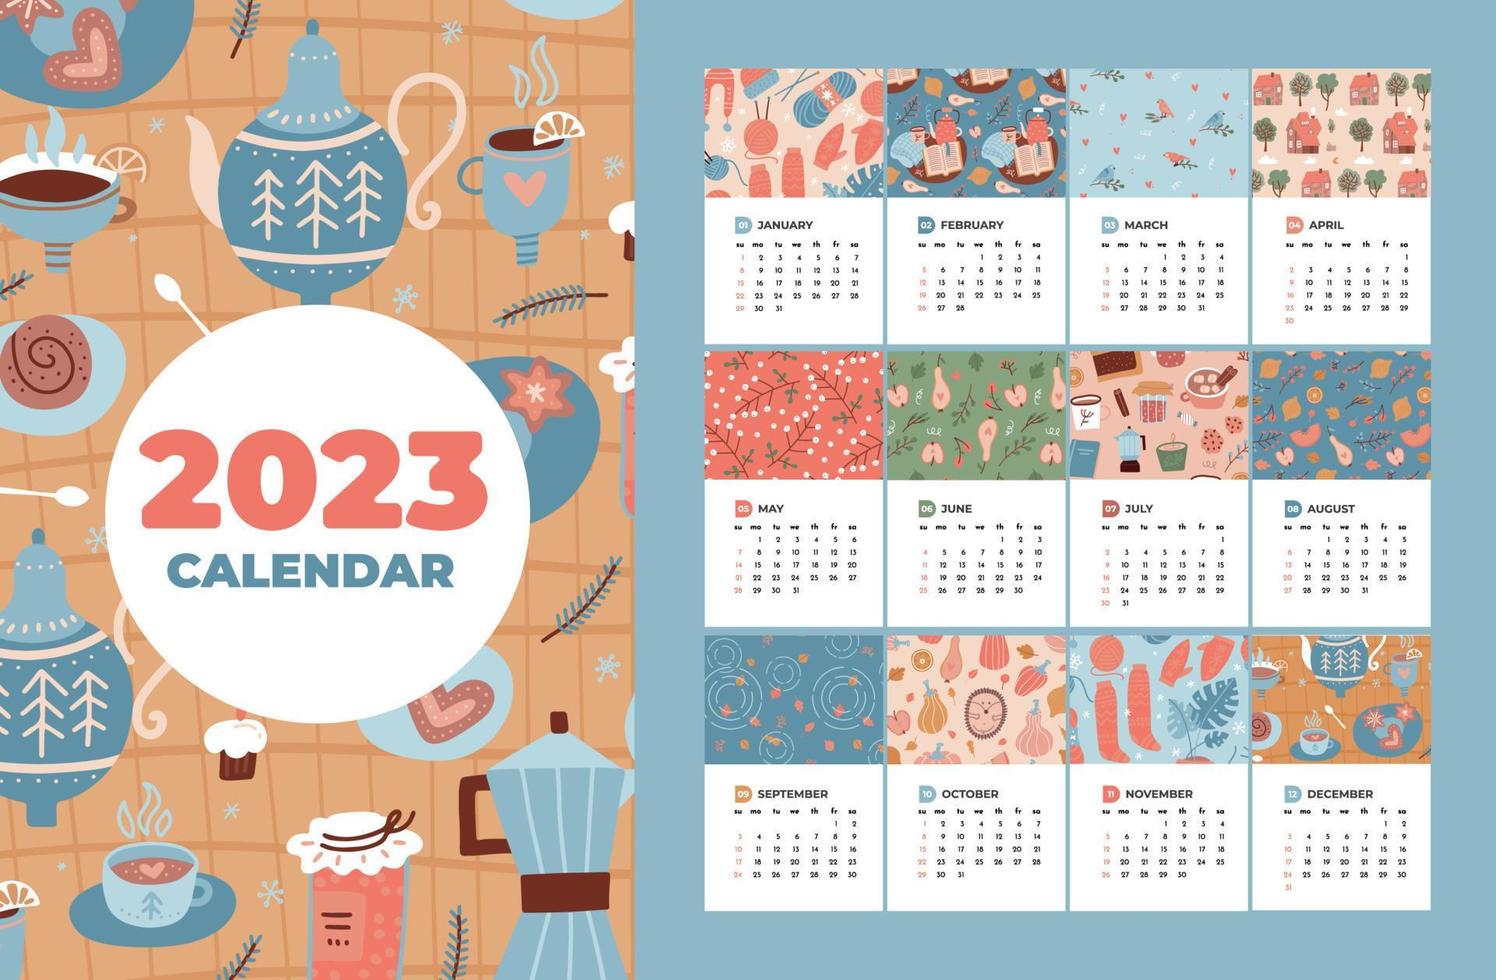 2023 calendar template set with 12 months pages and cover. Pieces of papers with colorful cozy seasons elements patterns in flat style. Week starts on Sunday. Vector hand drawn illustration.